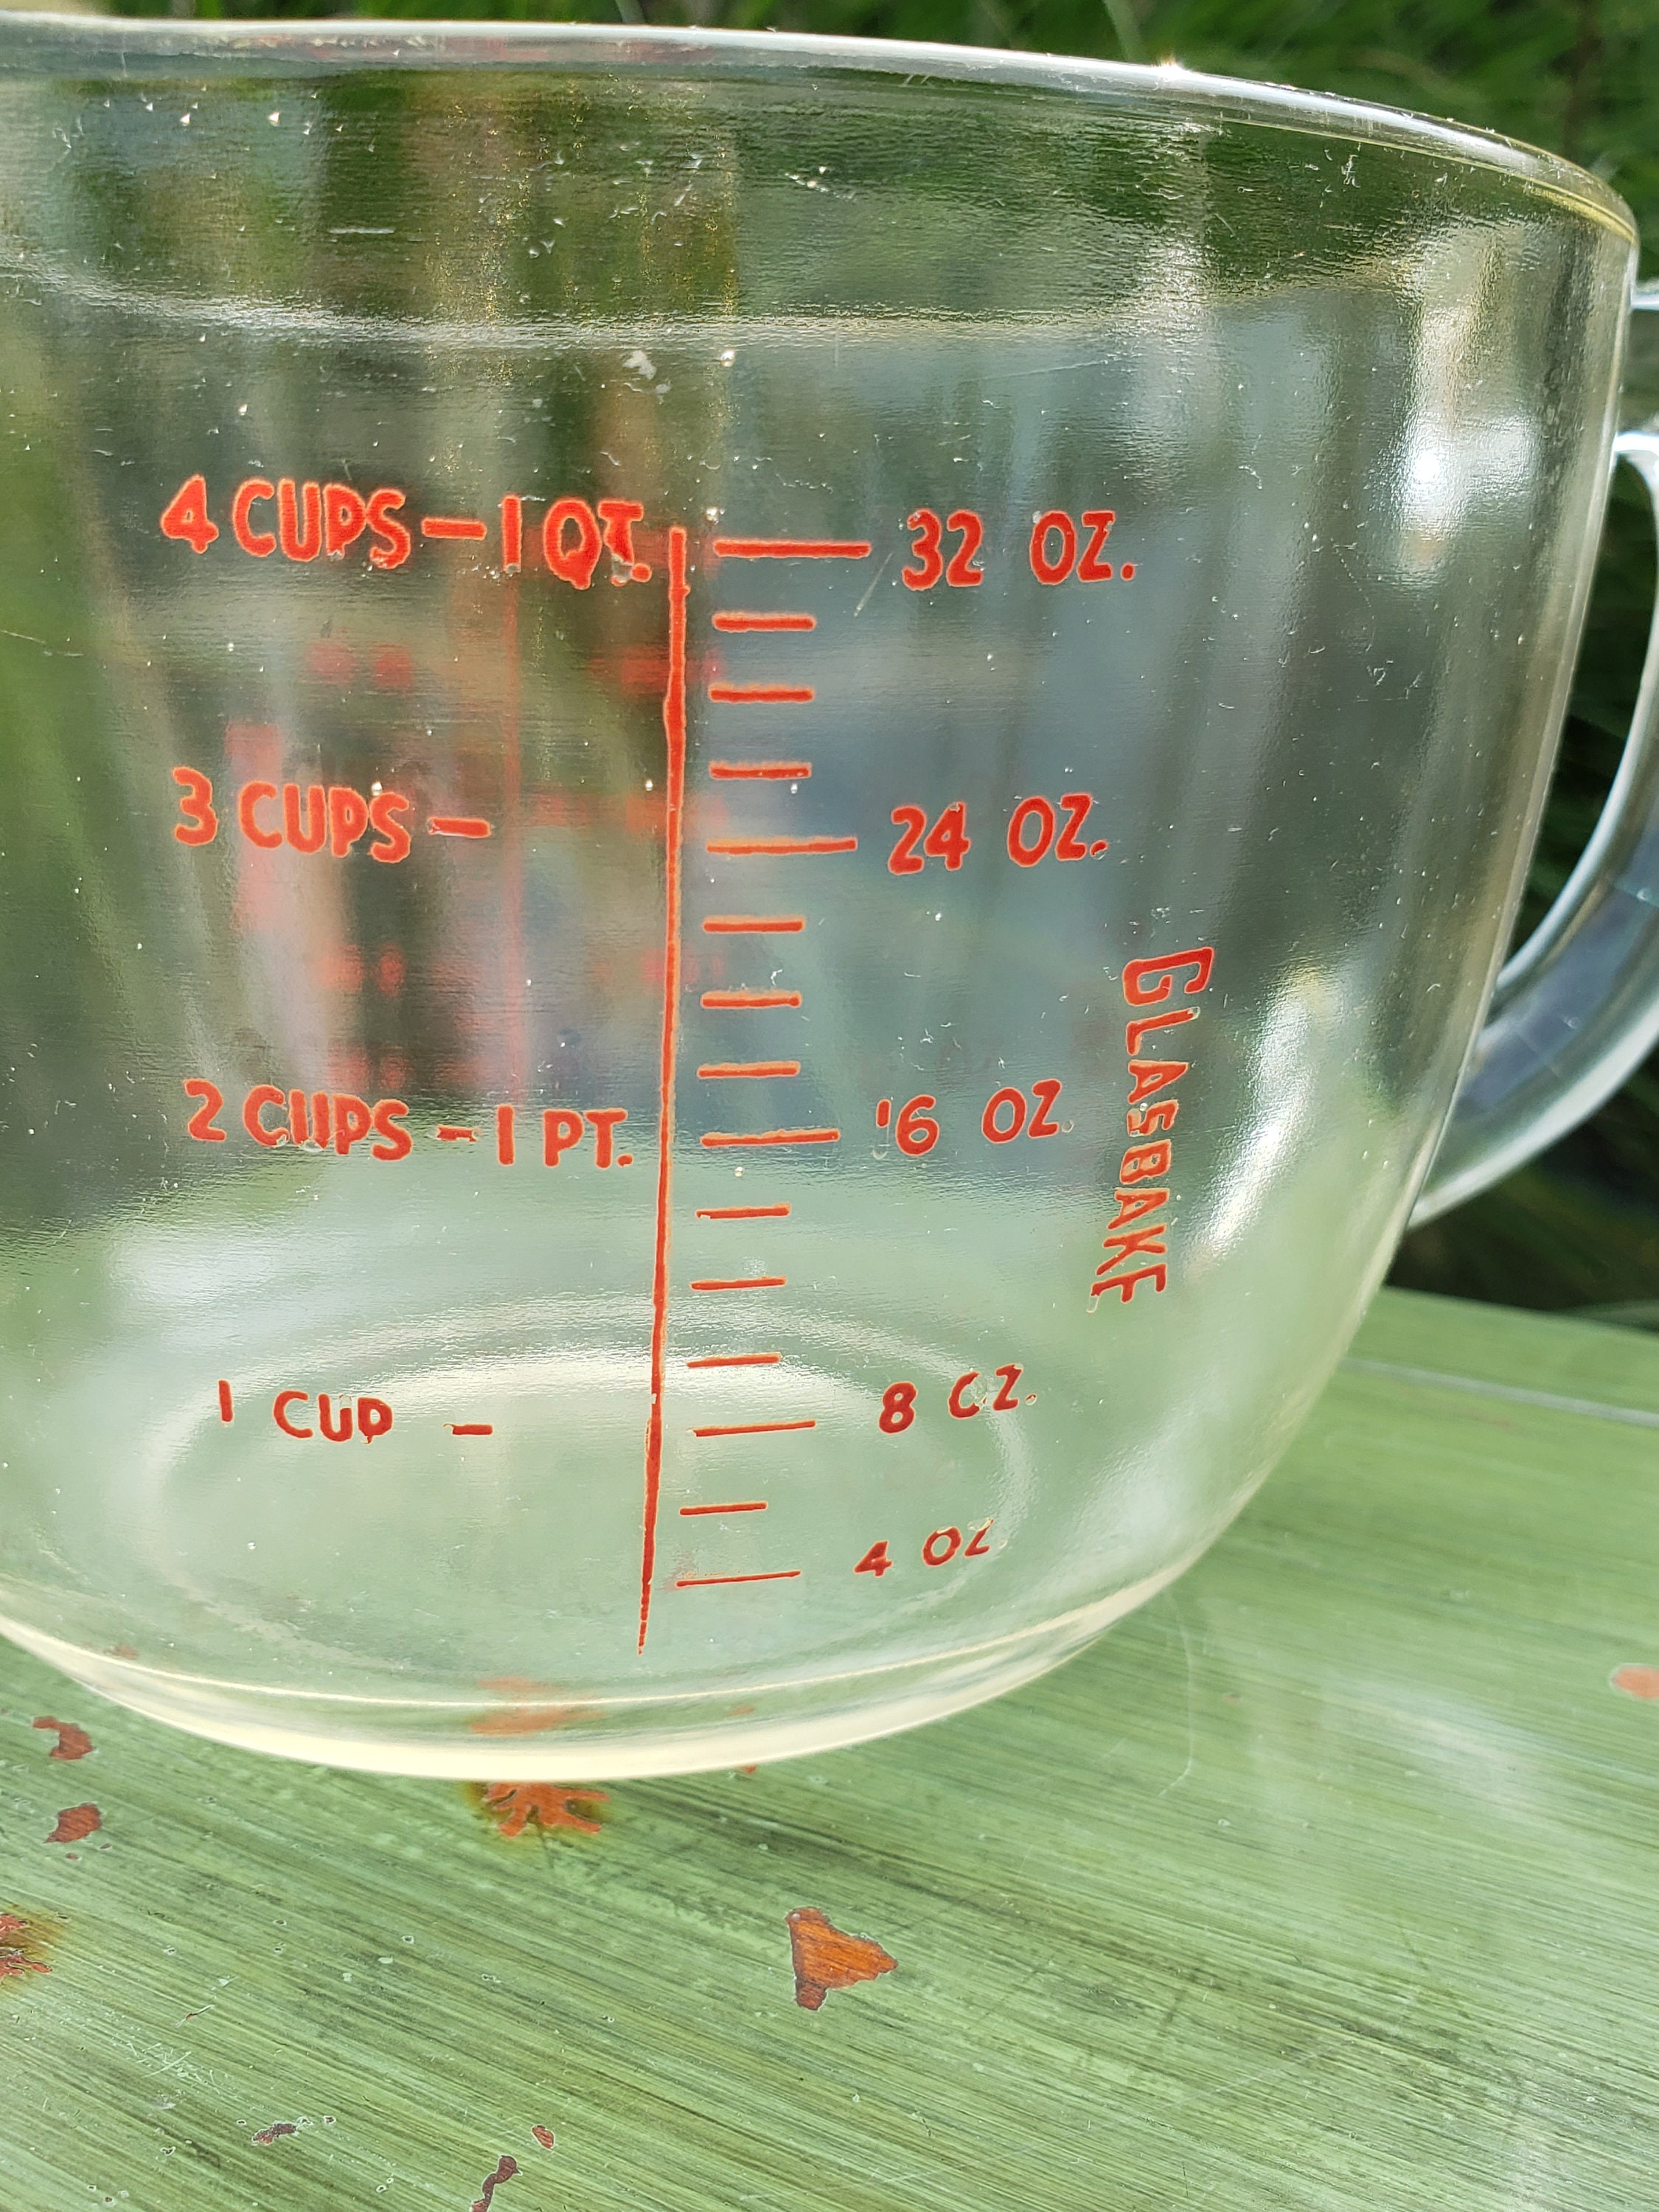 Glasbake D-handle 4 Cup Measuring Cup HTF in Near Perfect